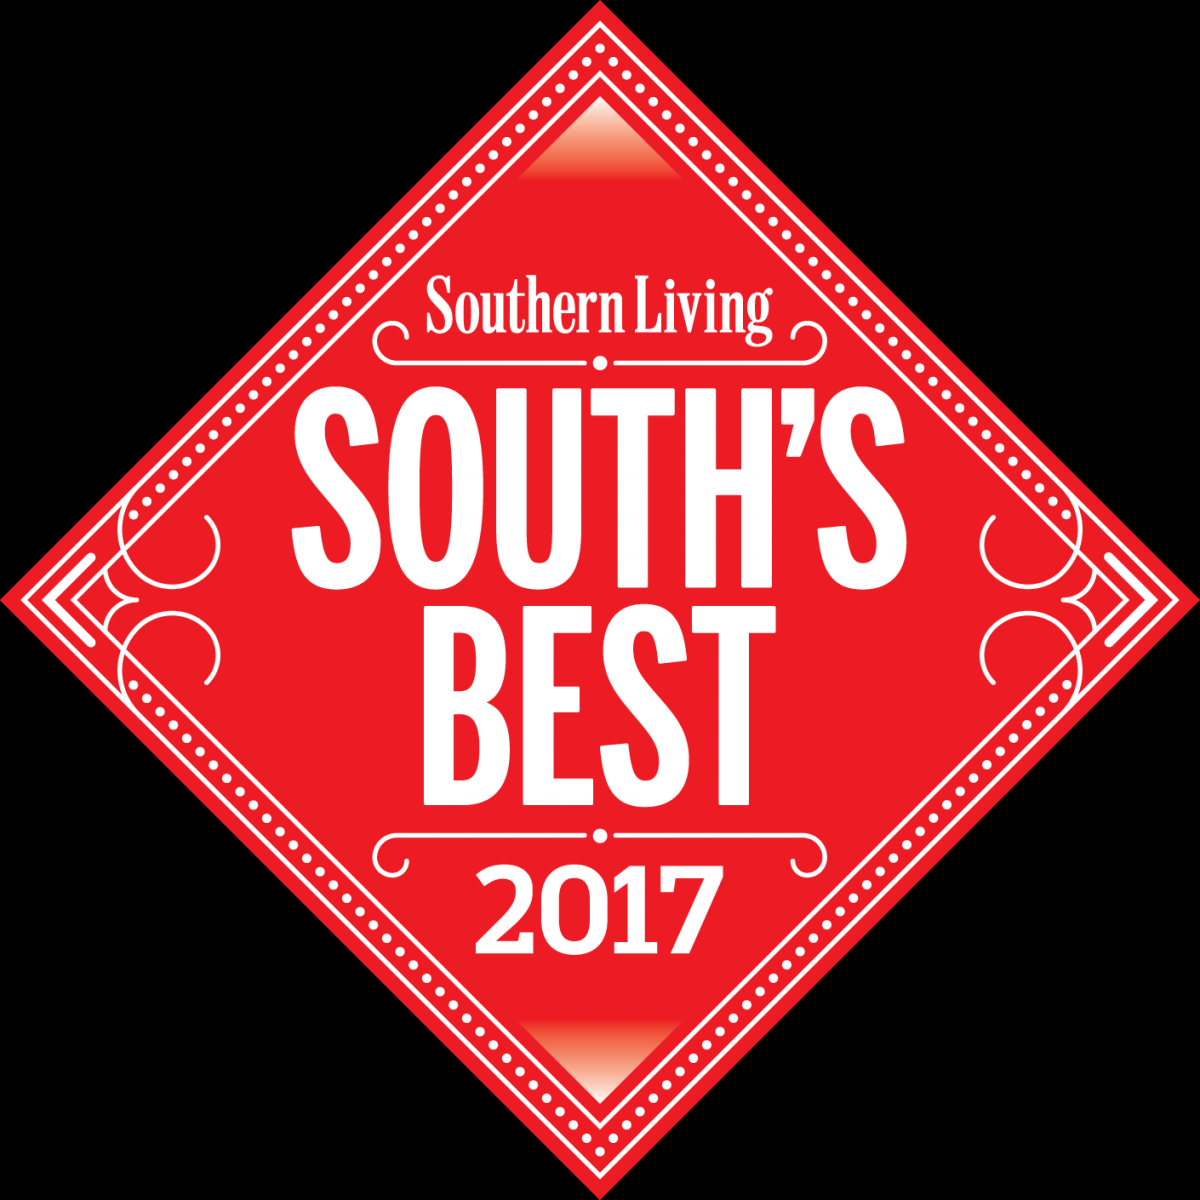 Southern Living awards Commander's Palace one of the souths best restaurants